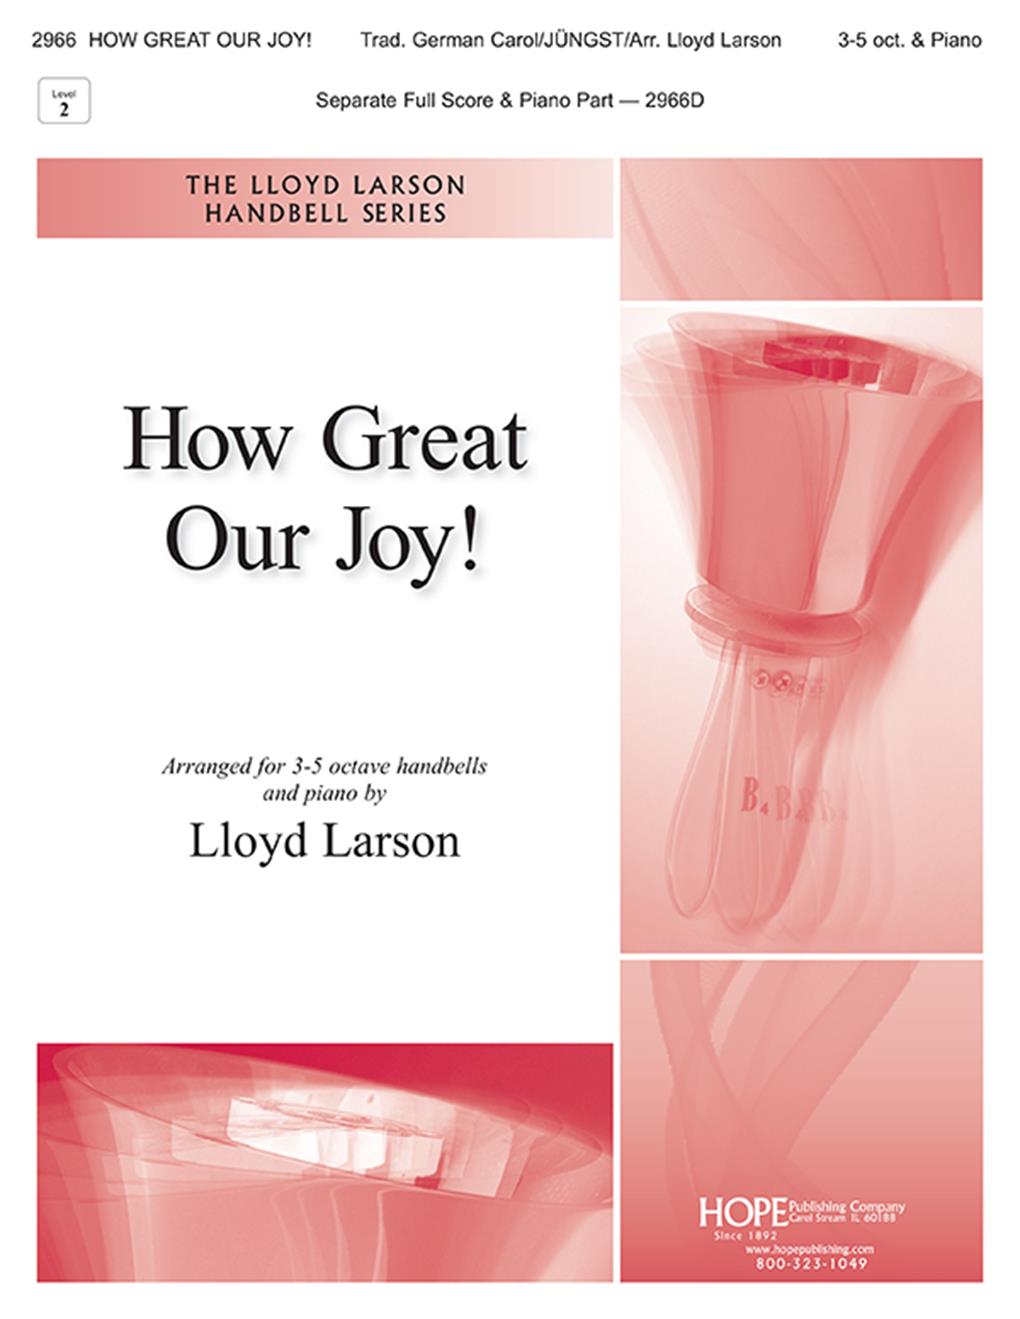 HOW GREAT OUR JOY - 3-5 Oct. Cover Image